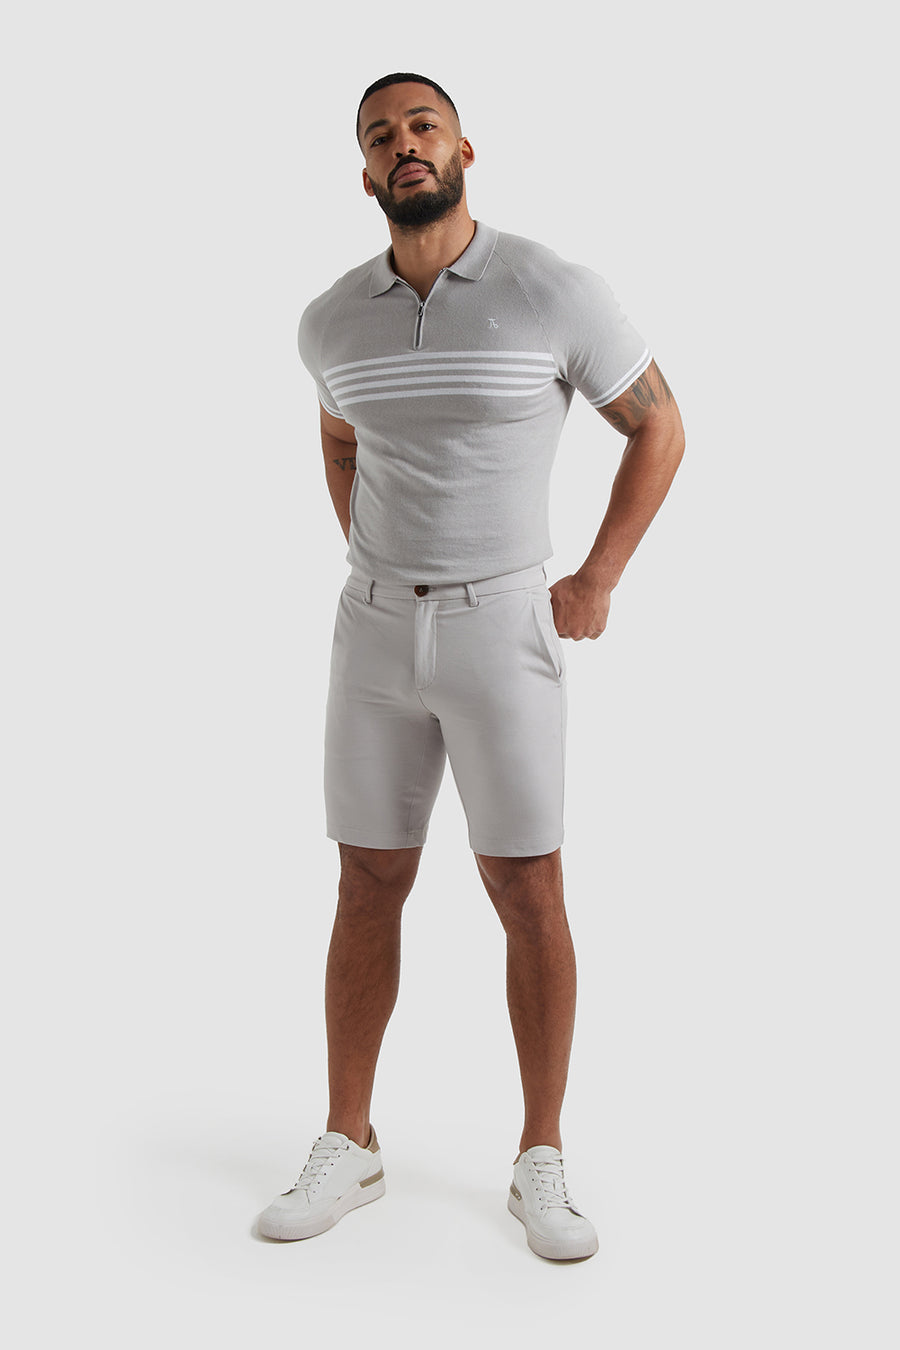 Athletic Fit Chino Shorts in Pale Grey - TAILORED ATHLETE - USA